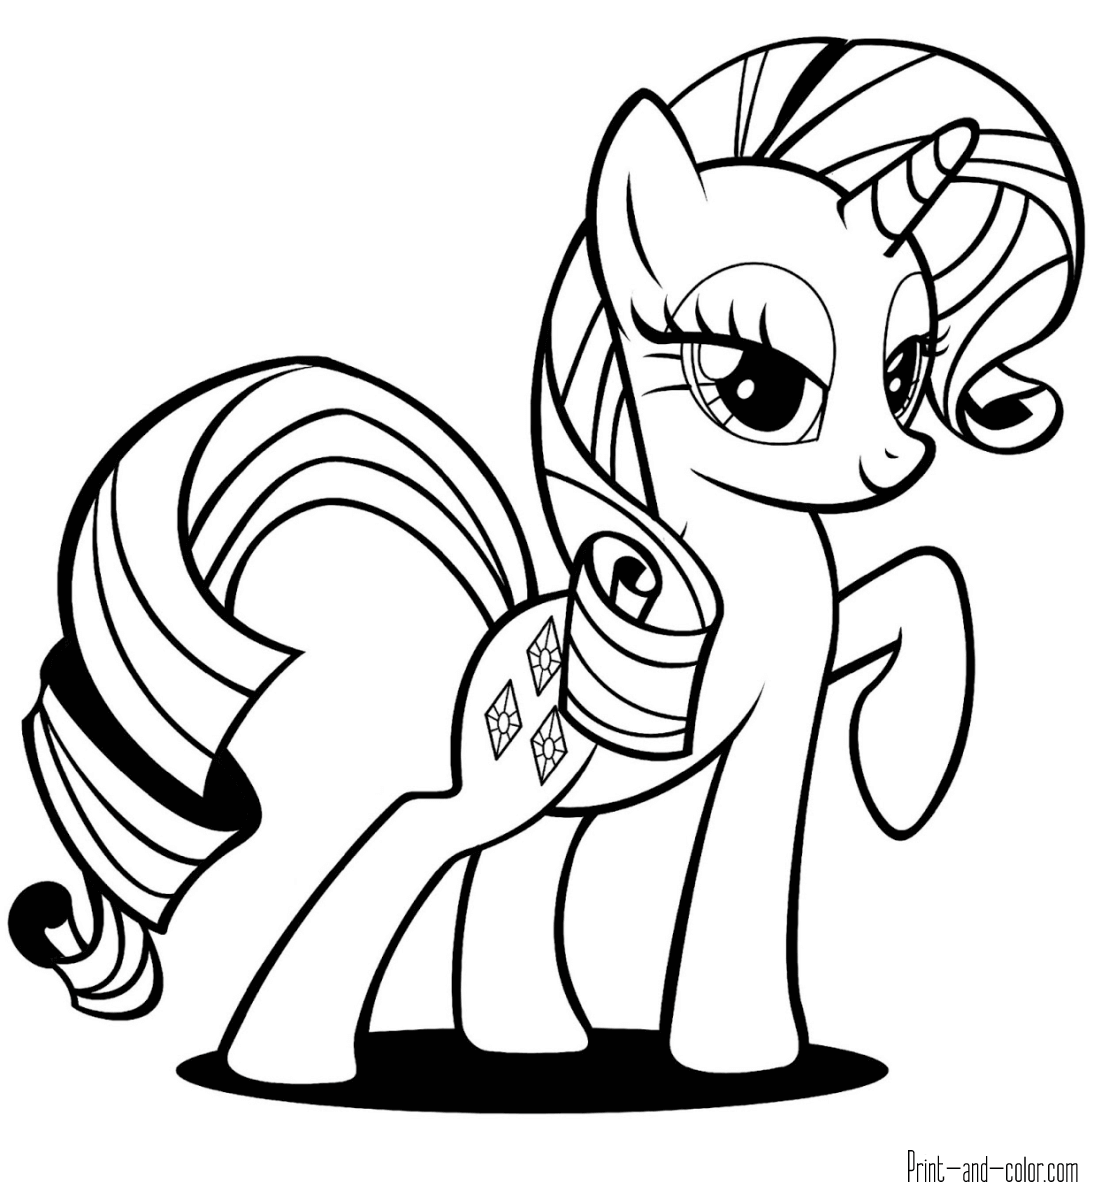 my little pony printouts my little pony coloring pages print and colorcom pony my little printouts 